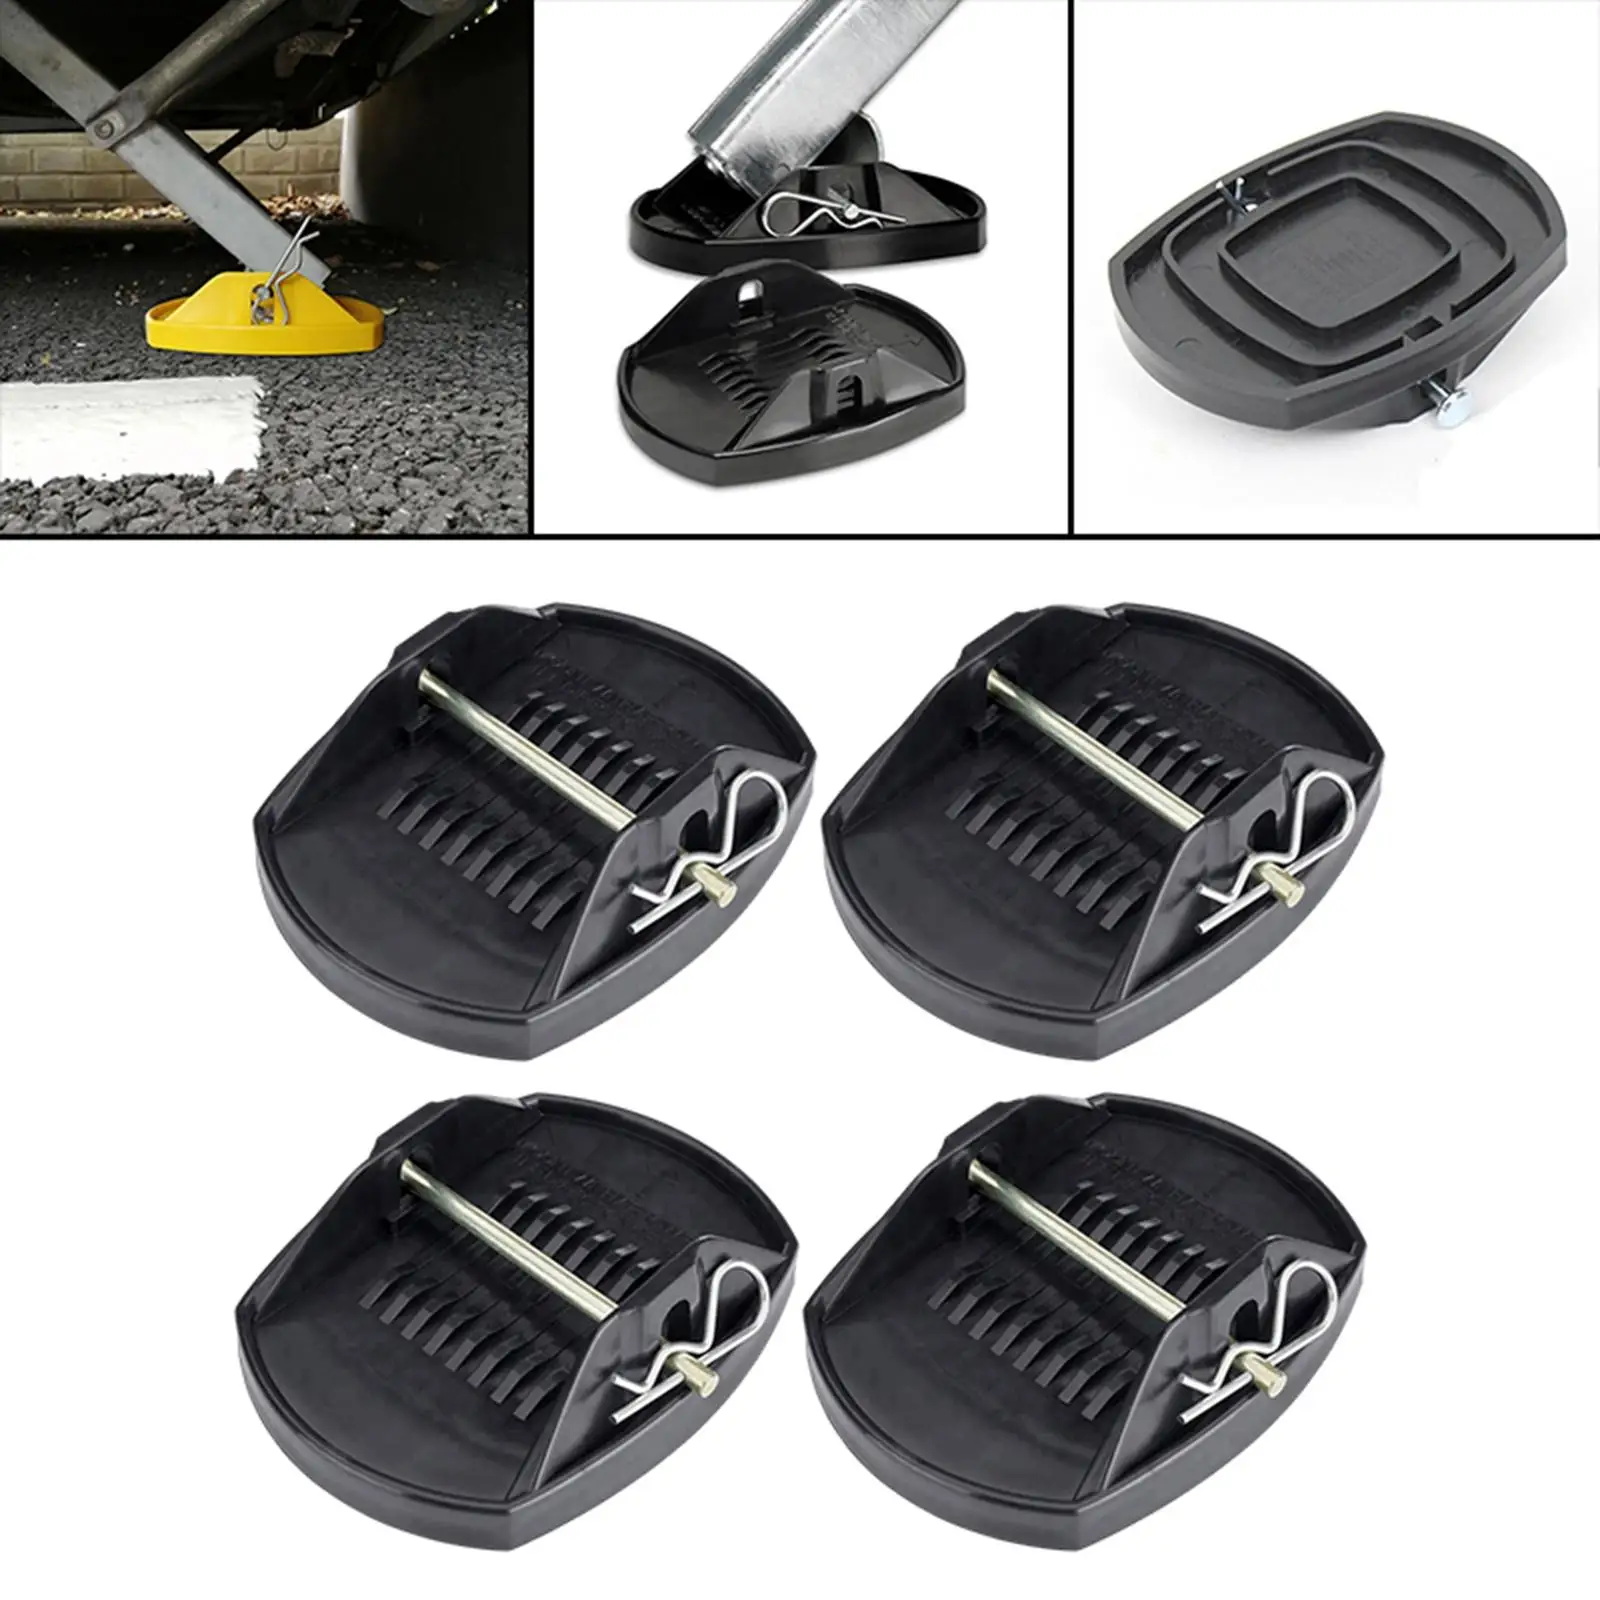 4x Universal Caravan Jack Pads Leveller Wheel Foot Leg Support Jacking Lift Pad Support Stand Adapter for Trailers RV